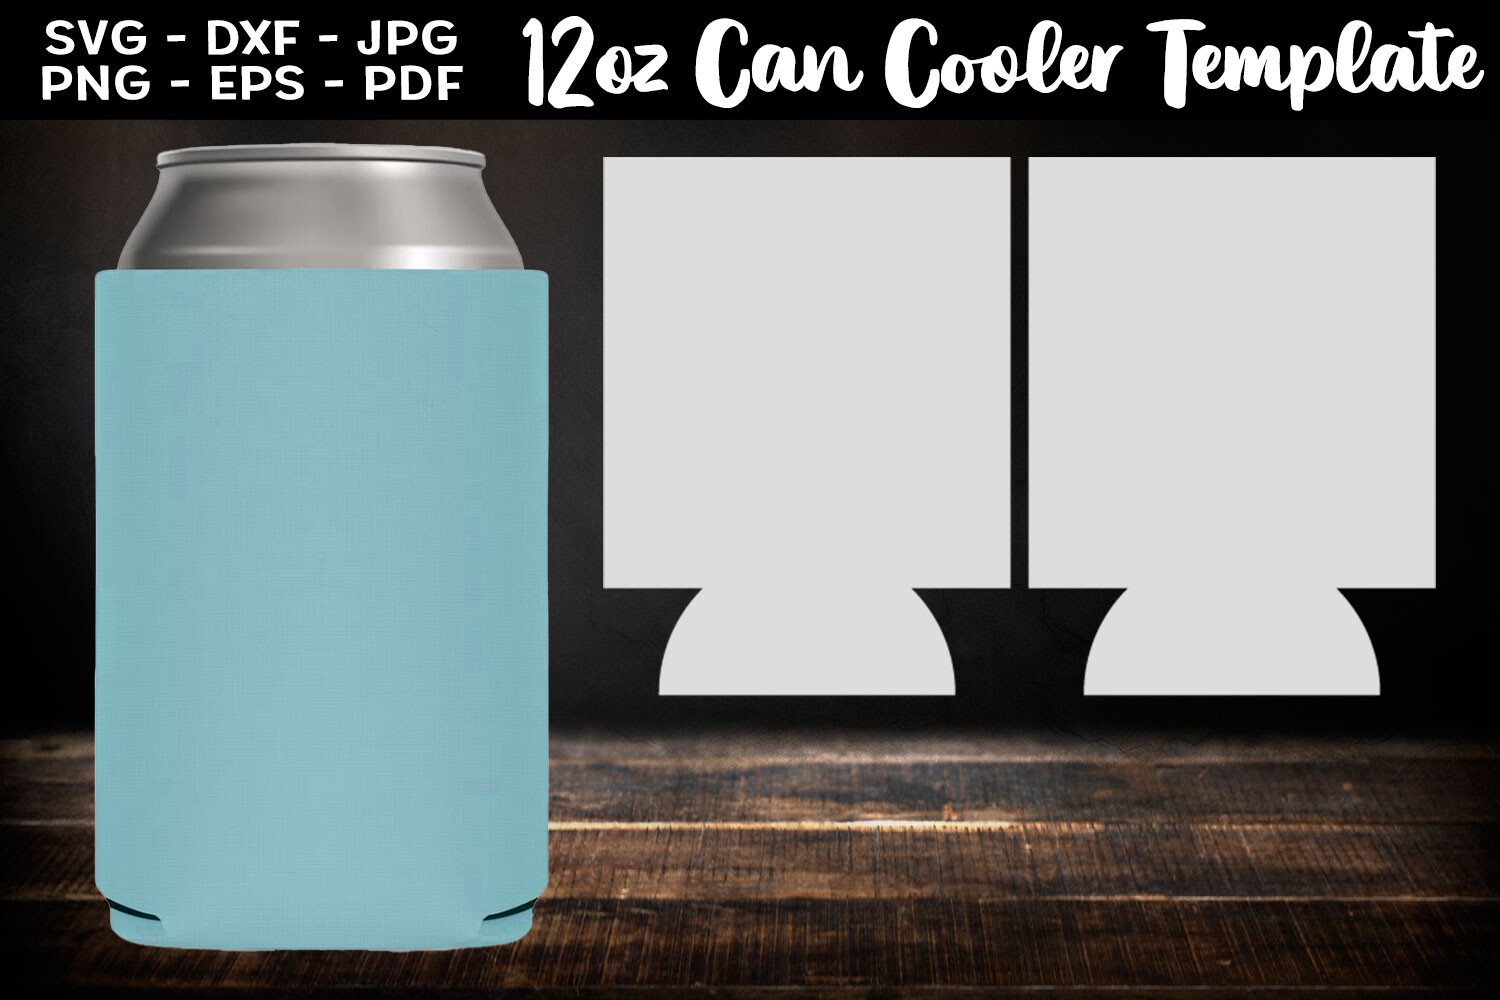 12oz Can Cooler Template SVG PNG Graphic by Aleksa Popovic